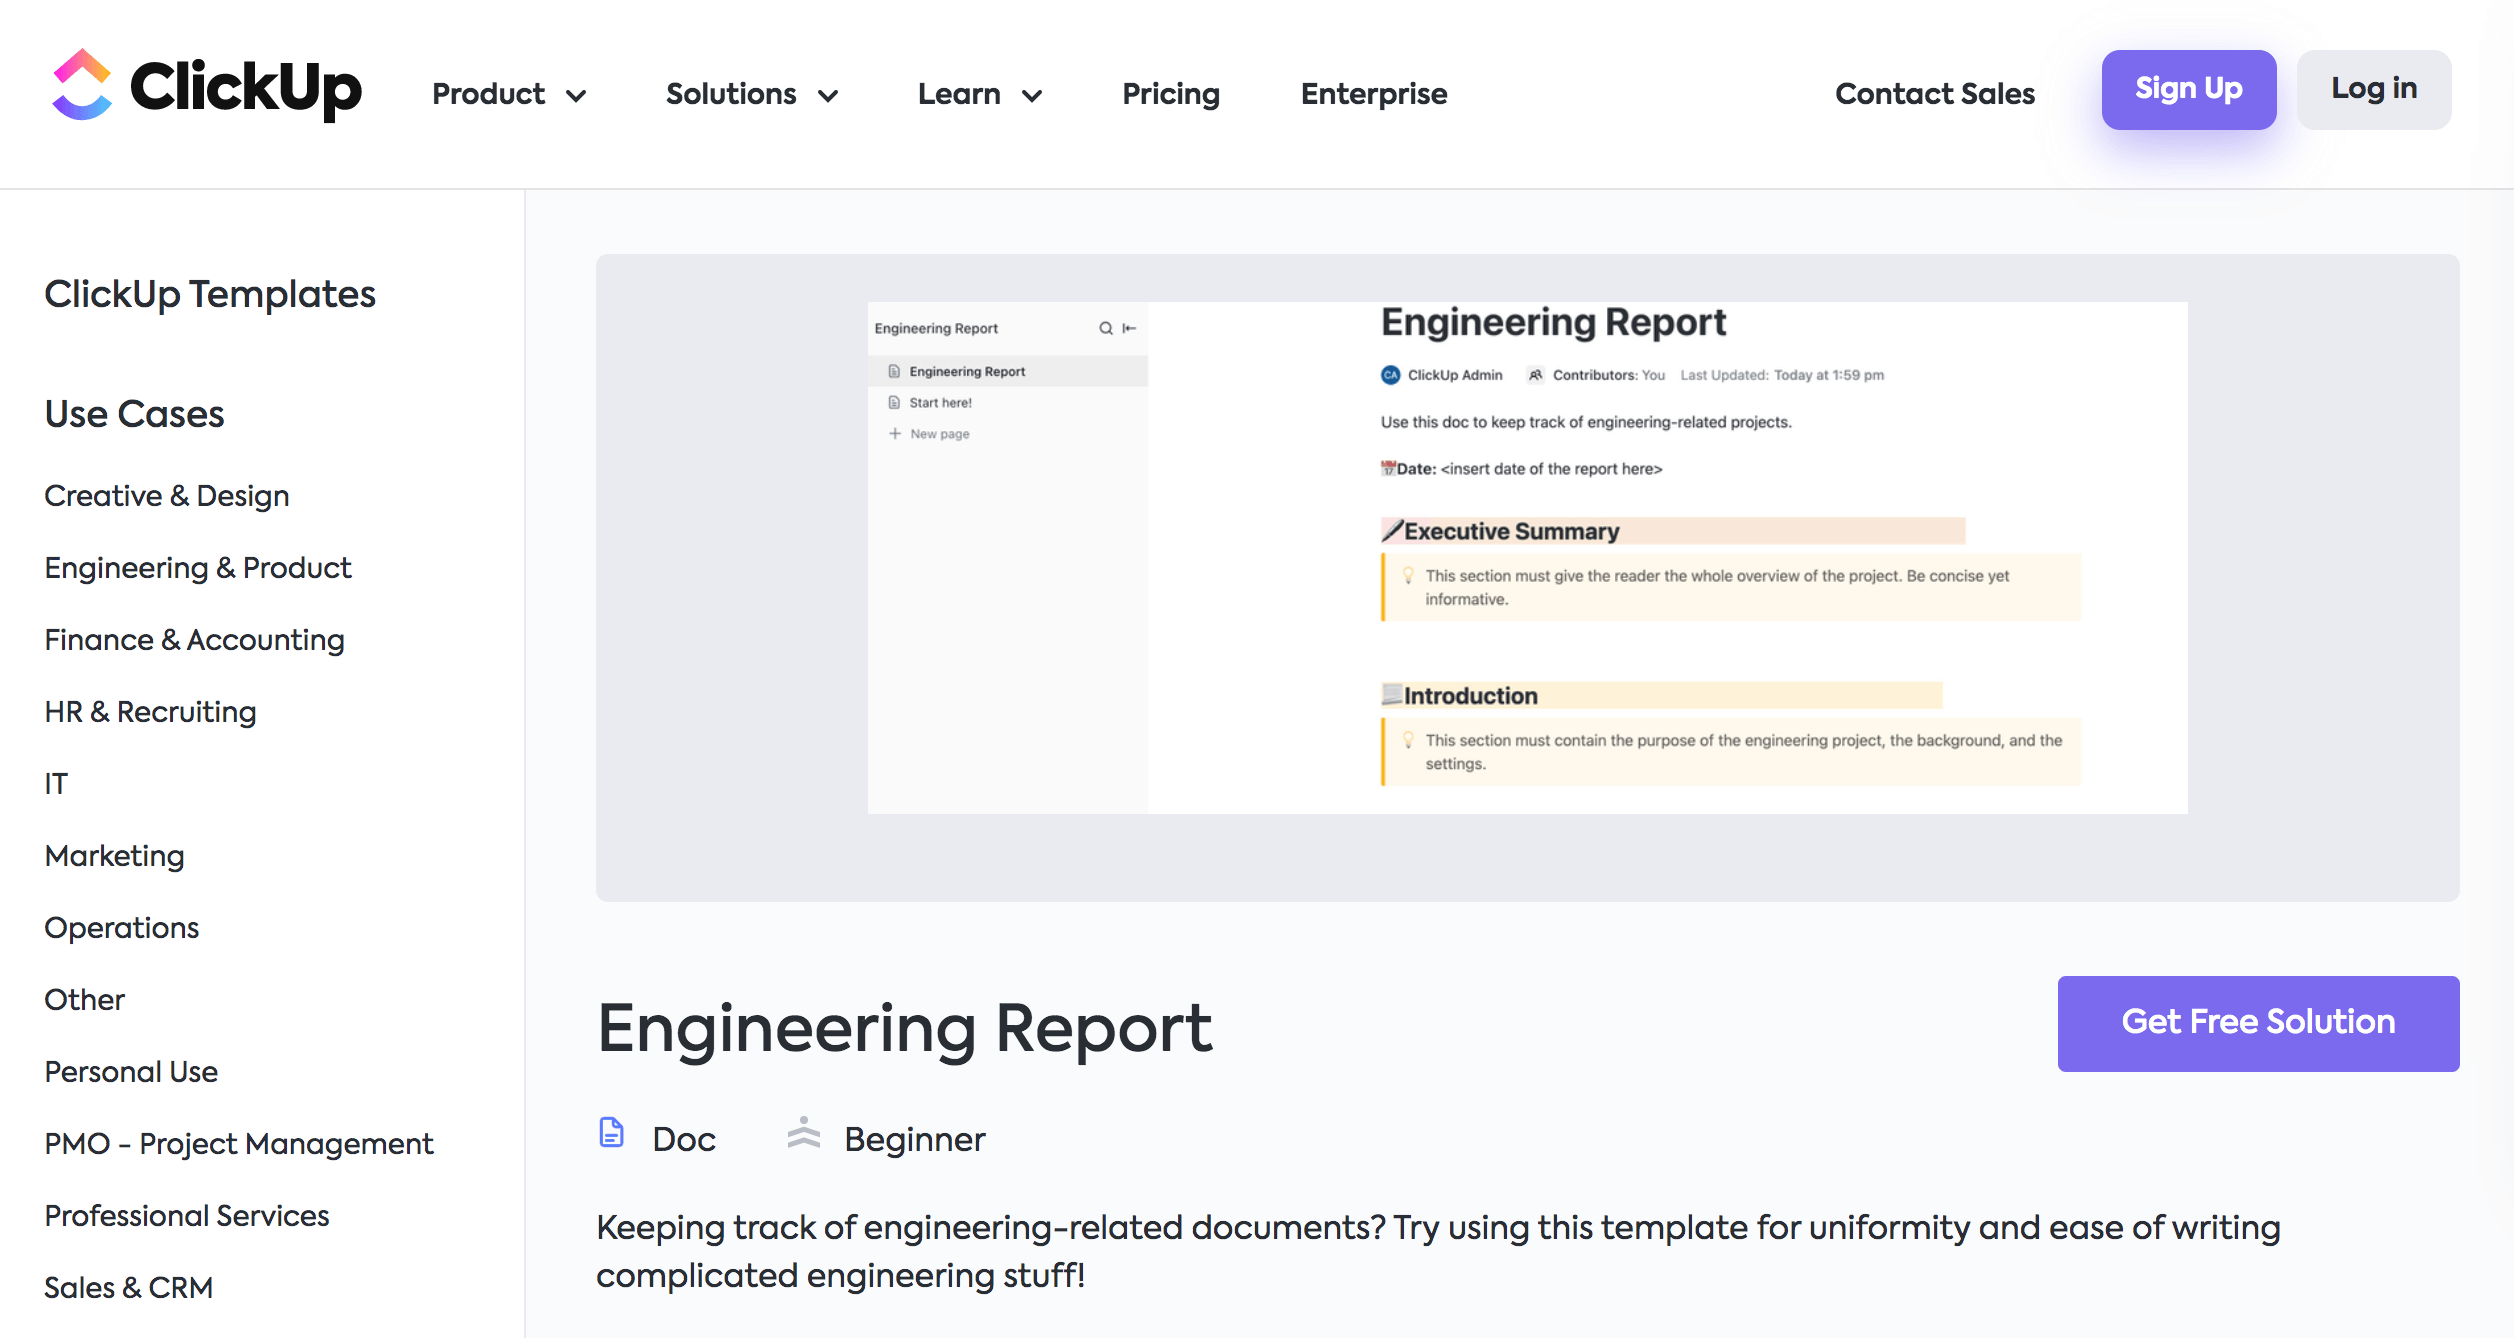 Build an engineering report in no time with ClickUp’s Engineering Report Template